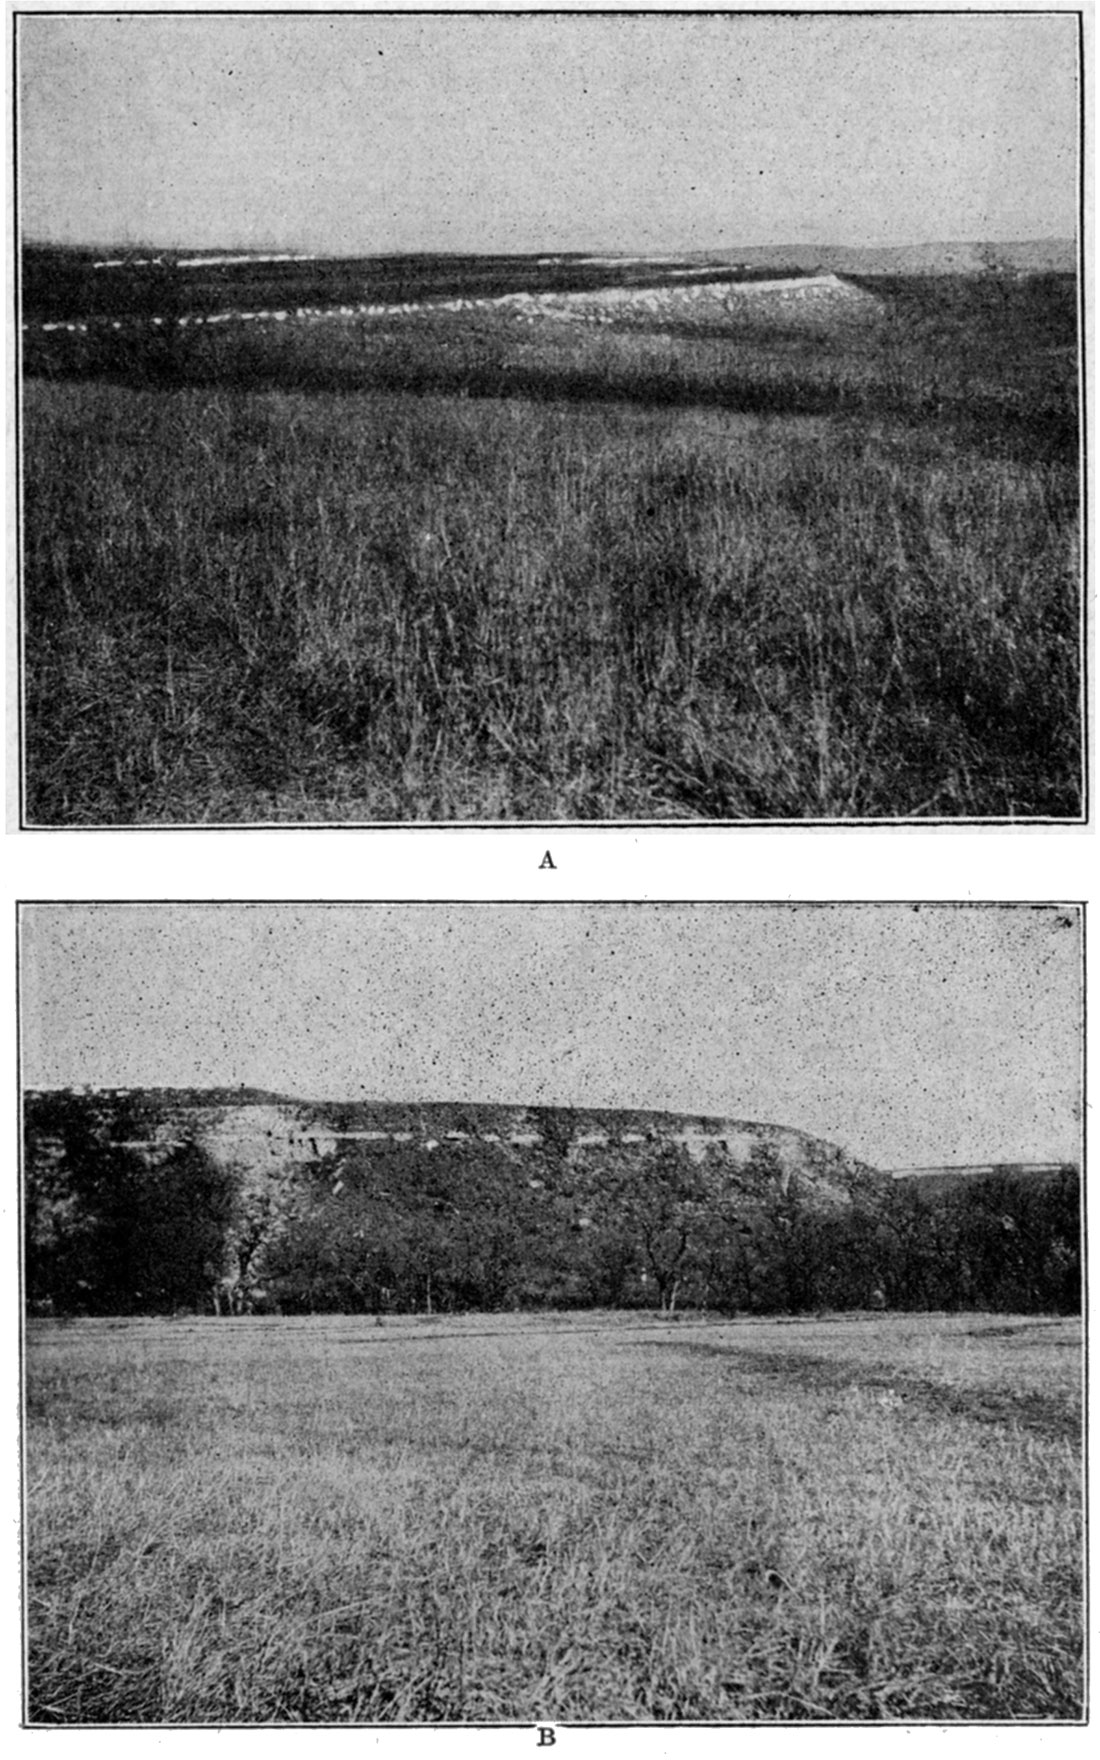 Two black and white photos: Escarpments of Fort Riley limestone overlooking Kansas river; River bluffs near Four Mile creek.